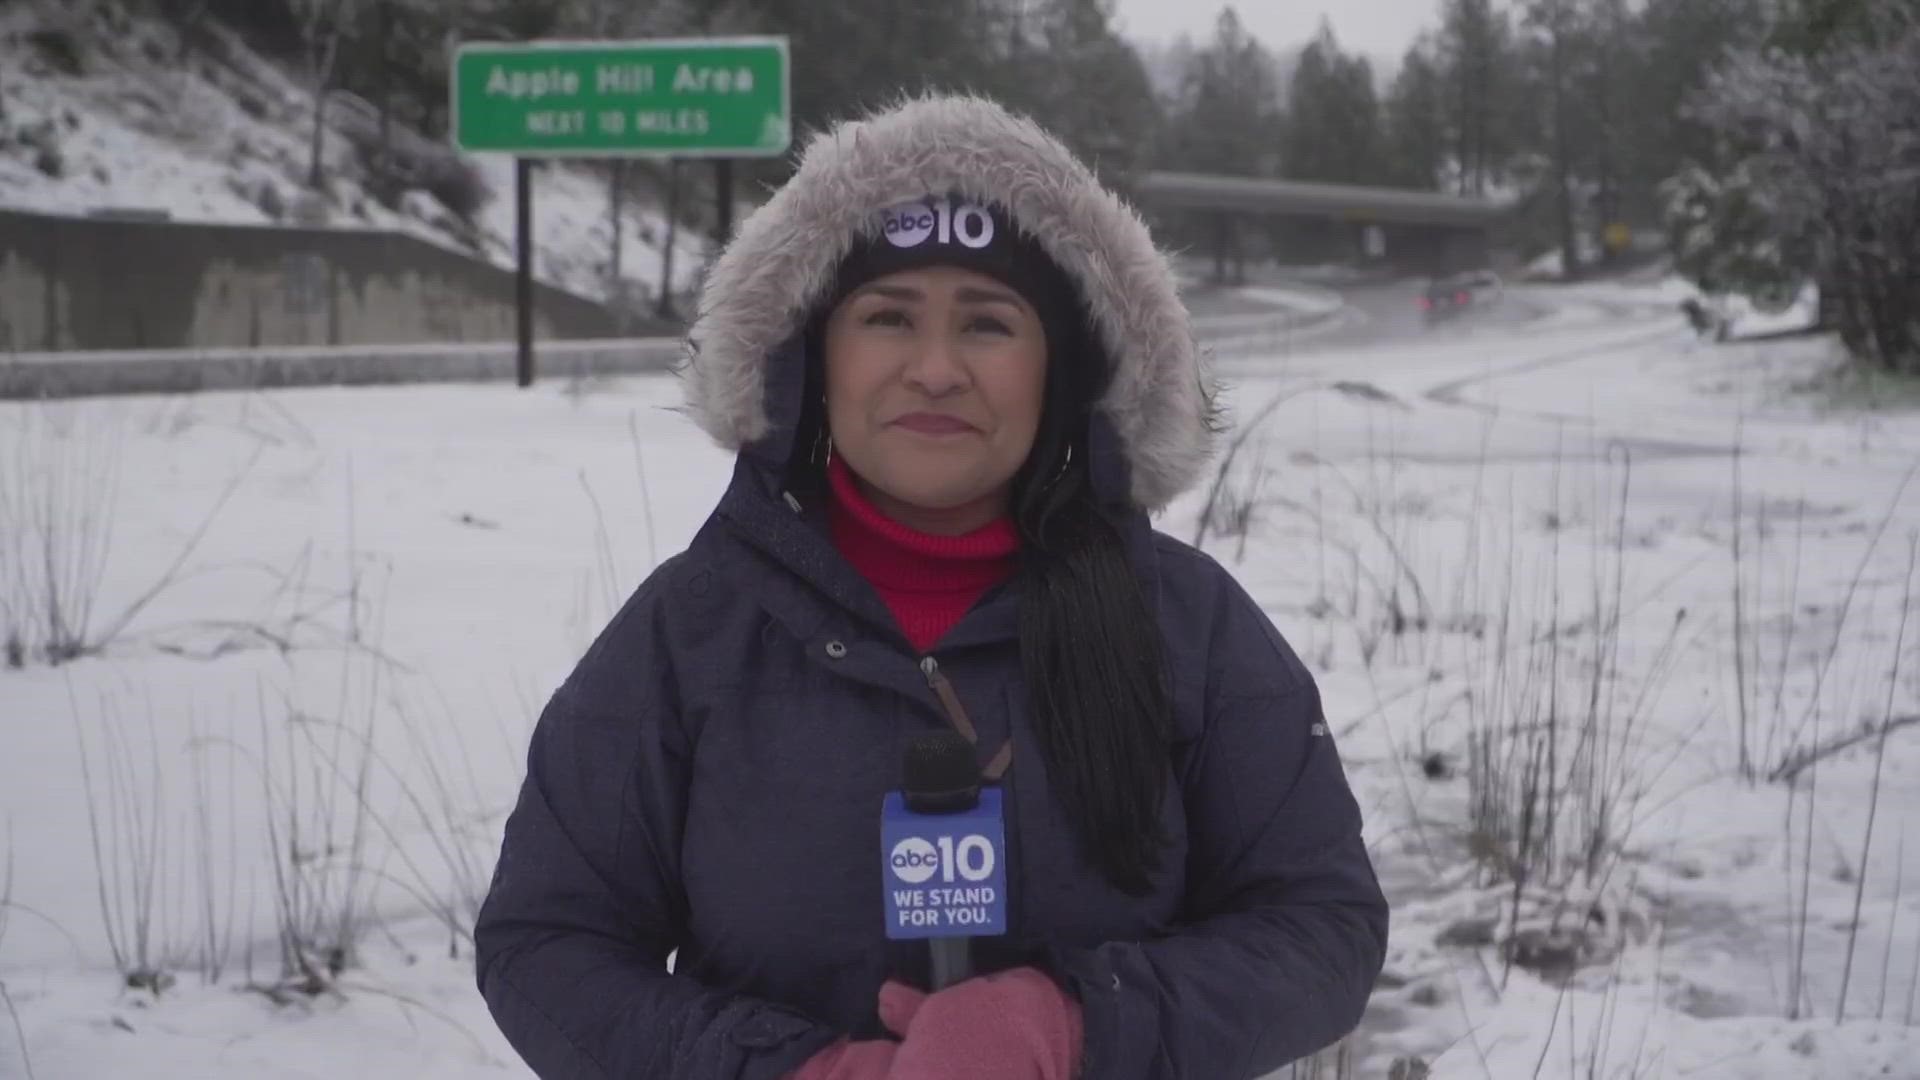 ABC10's reporter Roxanne Elias is near downtown Placerville on Highway 50, speaking to residents about dangerous road conditions.